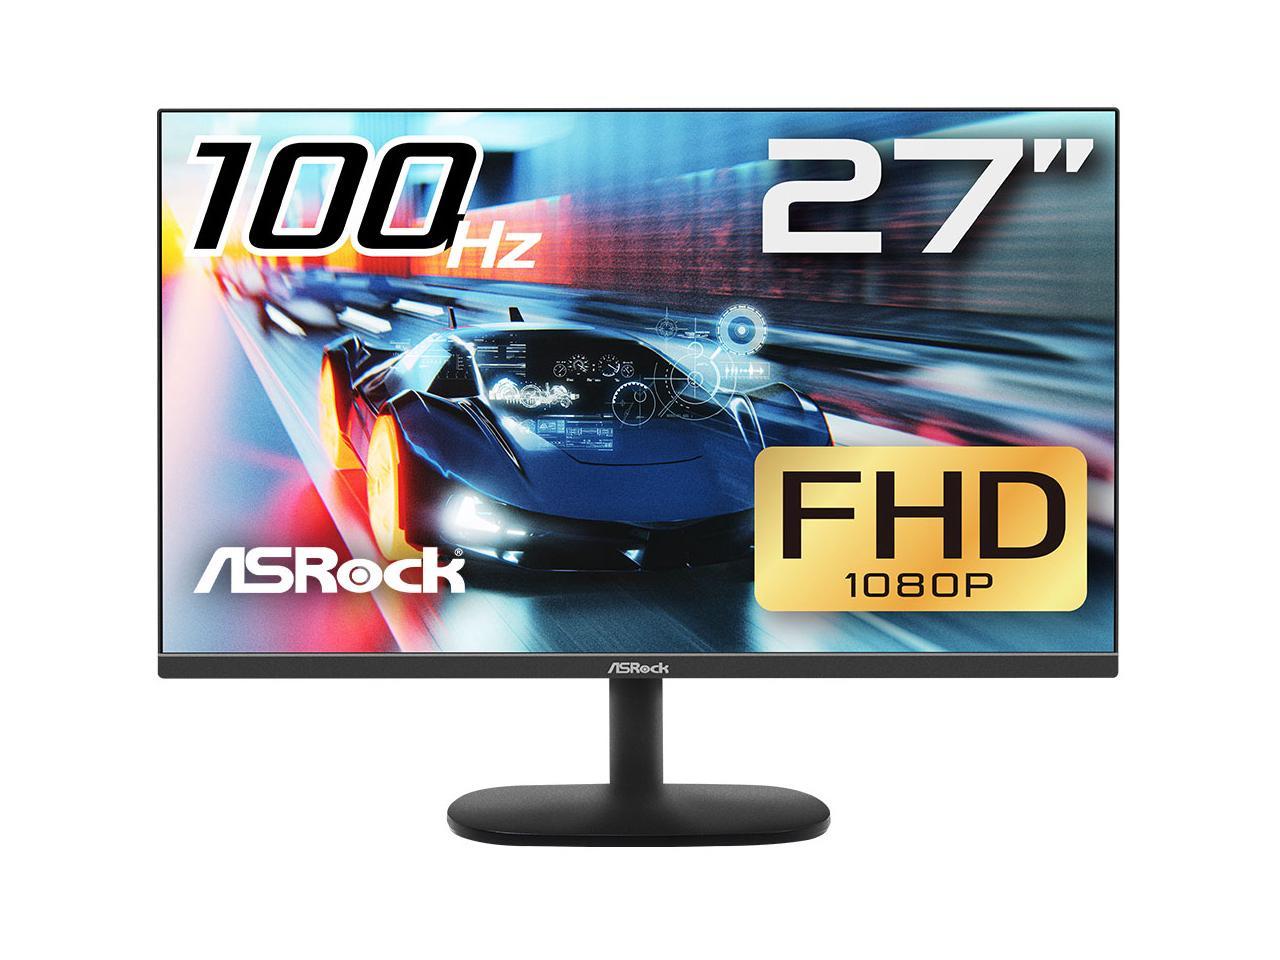 ASRock CL27FF 27″ 1080p 100Hz IPS FHD Gaming Monitor with FreeSync